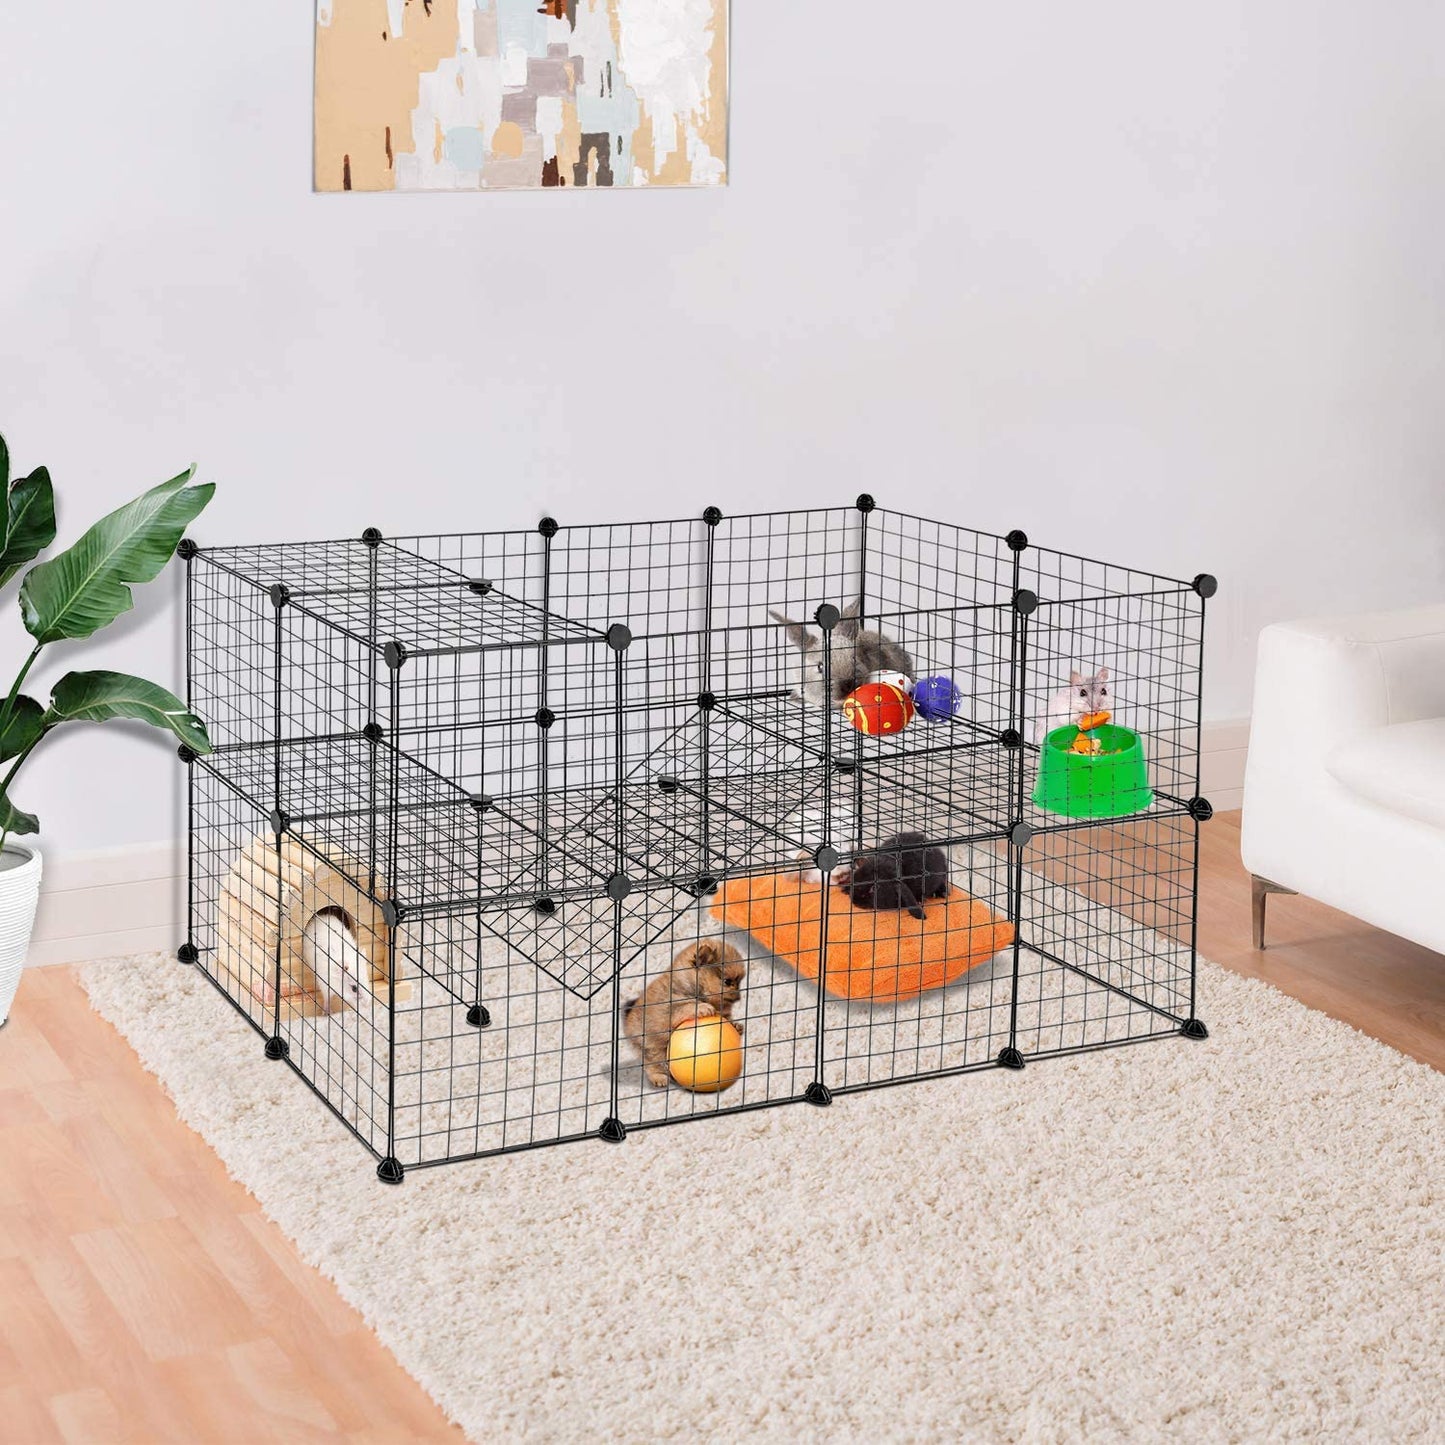 Pet playpen, Small Animal Cage, DIY 36 Panels Metal Wire Fence with Ramp for Guinea Pigs, Ferret, Rabbits, Pet Rat, Puppies, Indoor Use